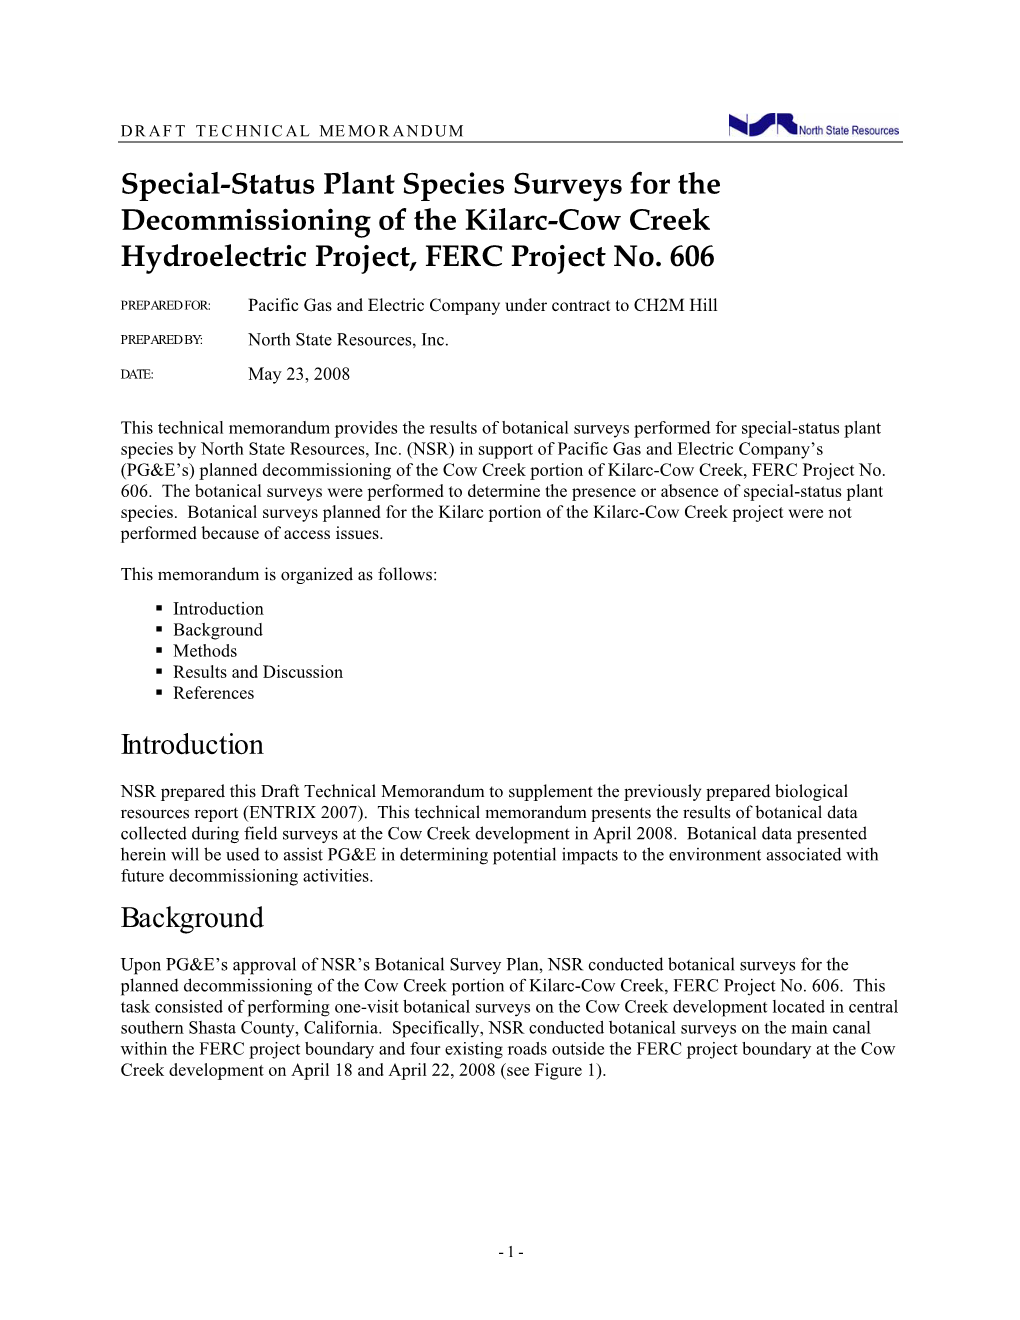 Special-Status Plant Species Surveys for the Decommissioning of the Kilarc-Cow Creek Hydroelectric Project, FERC Project No